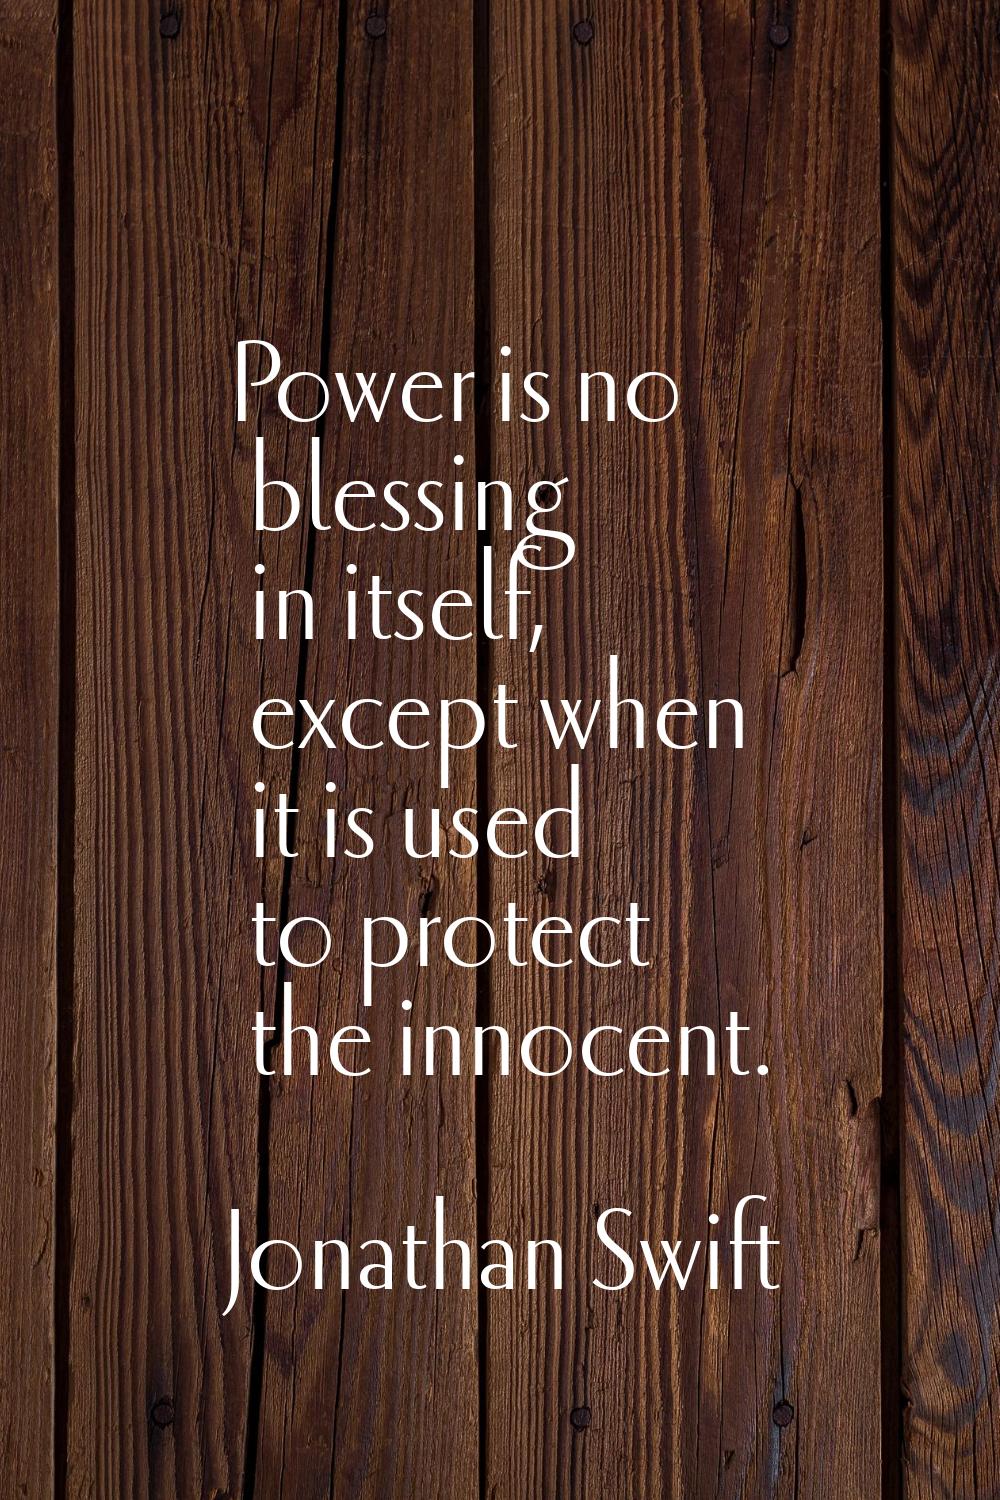 Power is no blessing in itself, except when it is used to protect the innocent.